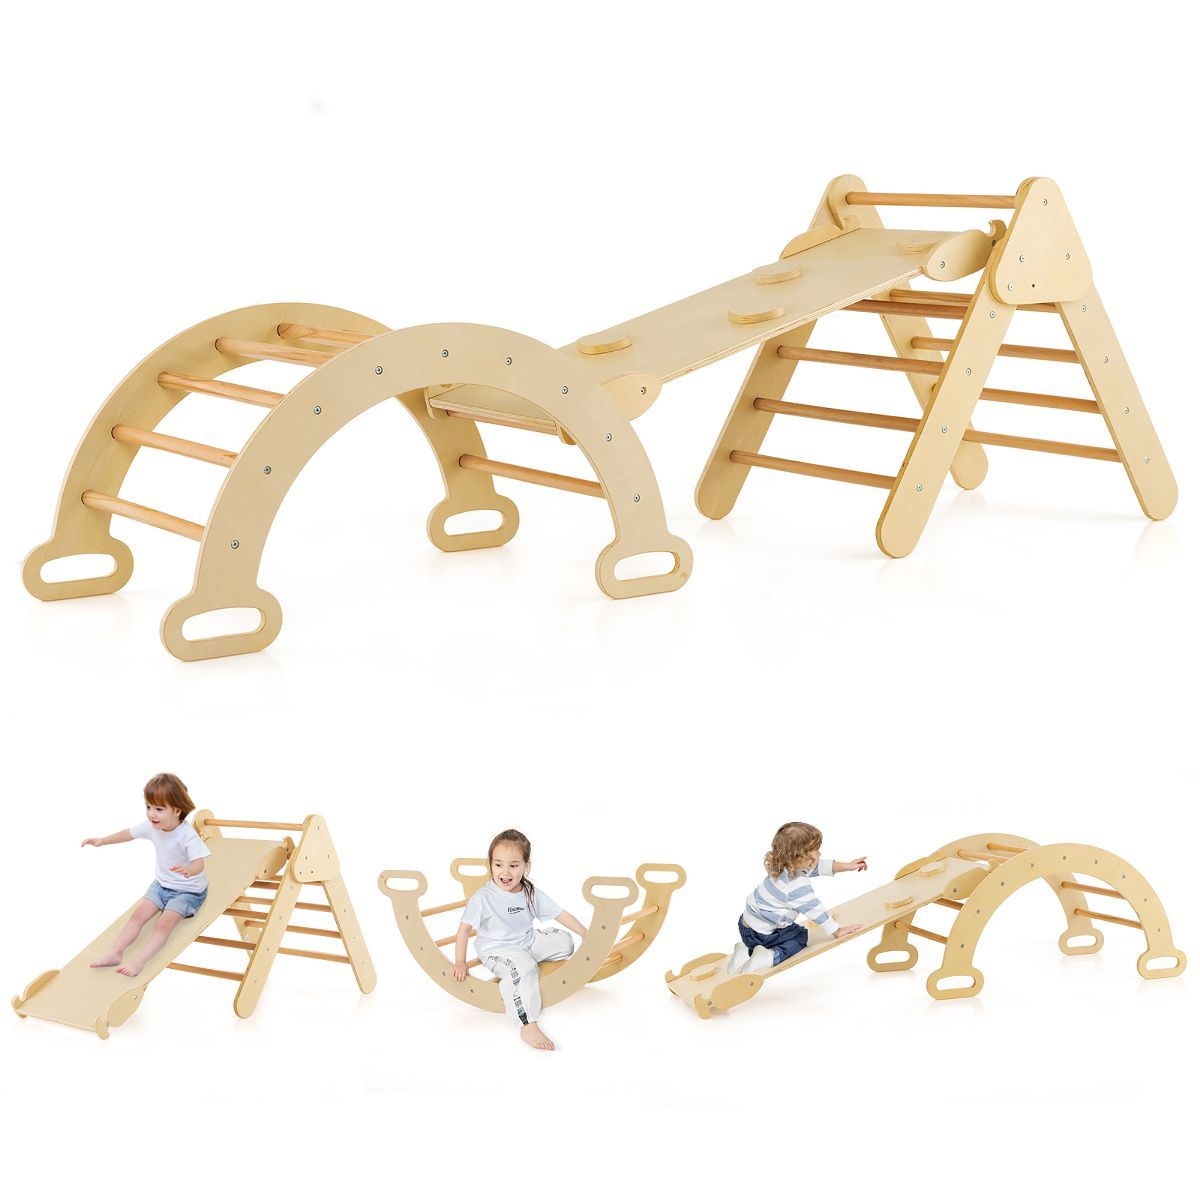 Costway 3-in-1 Kids Climber Set Toddler Wooden Play Arch with Sliding and Climbing Ramp | Target